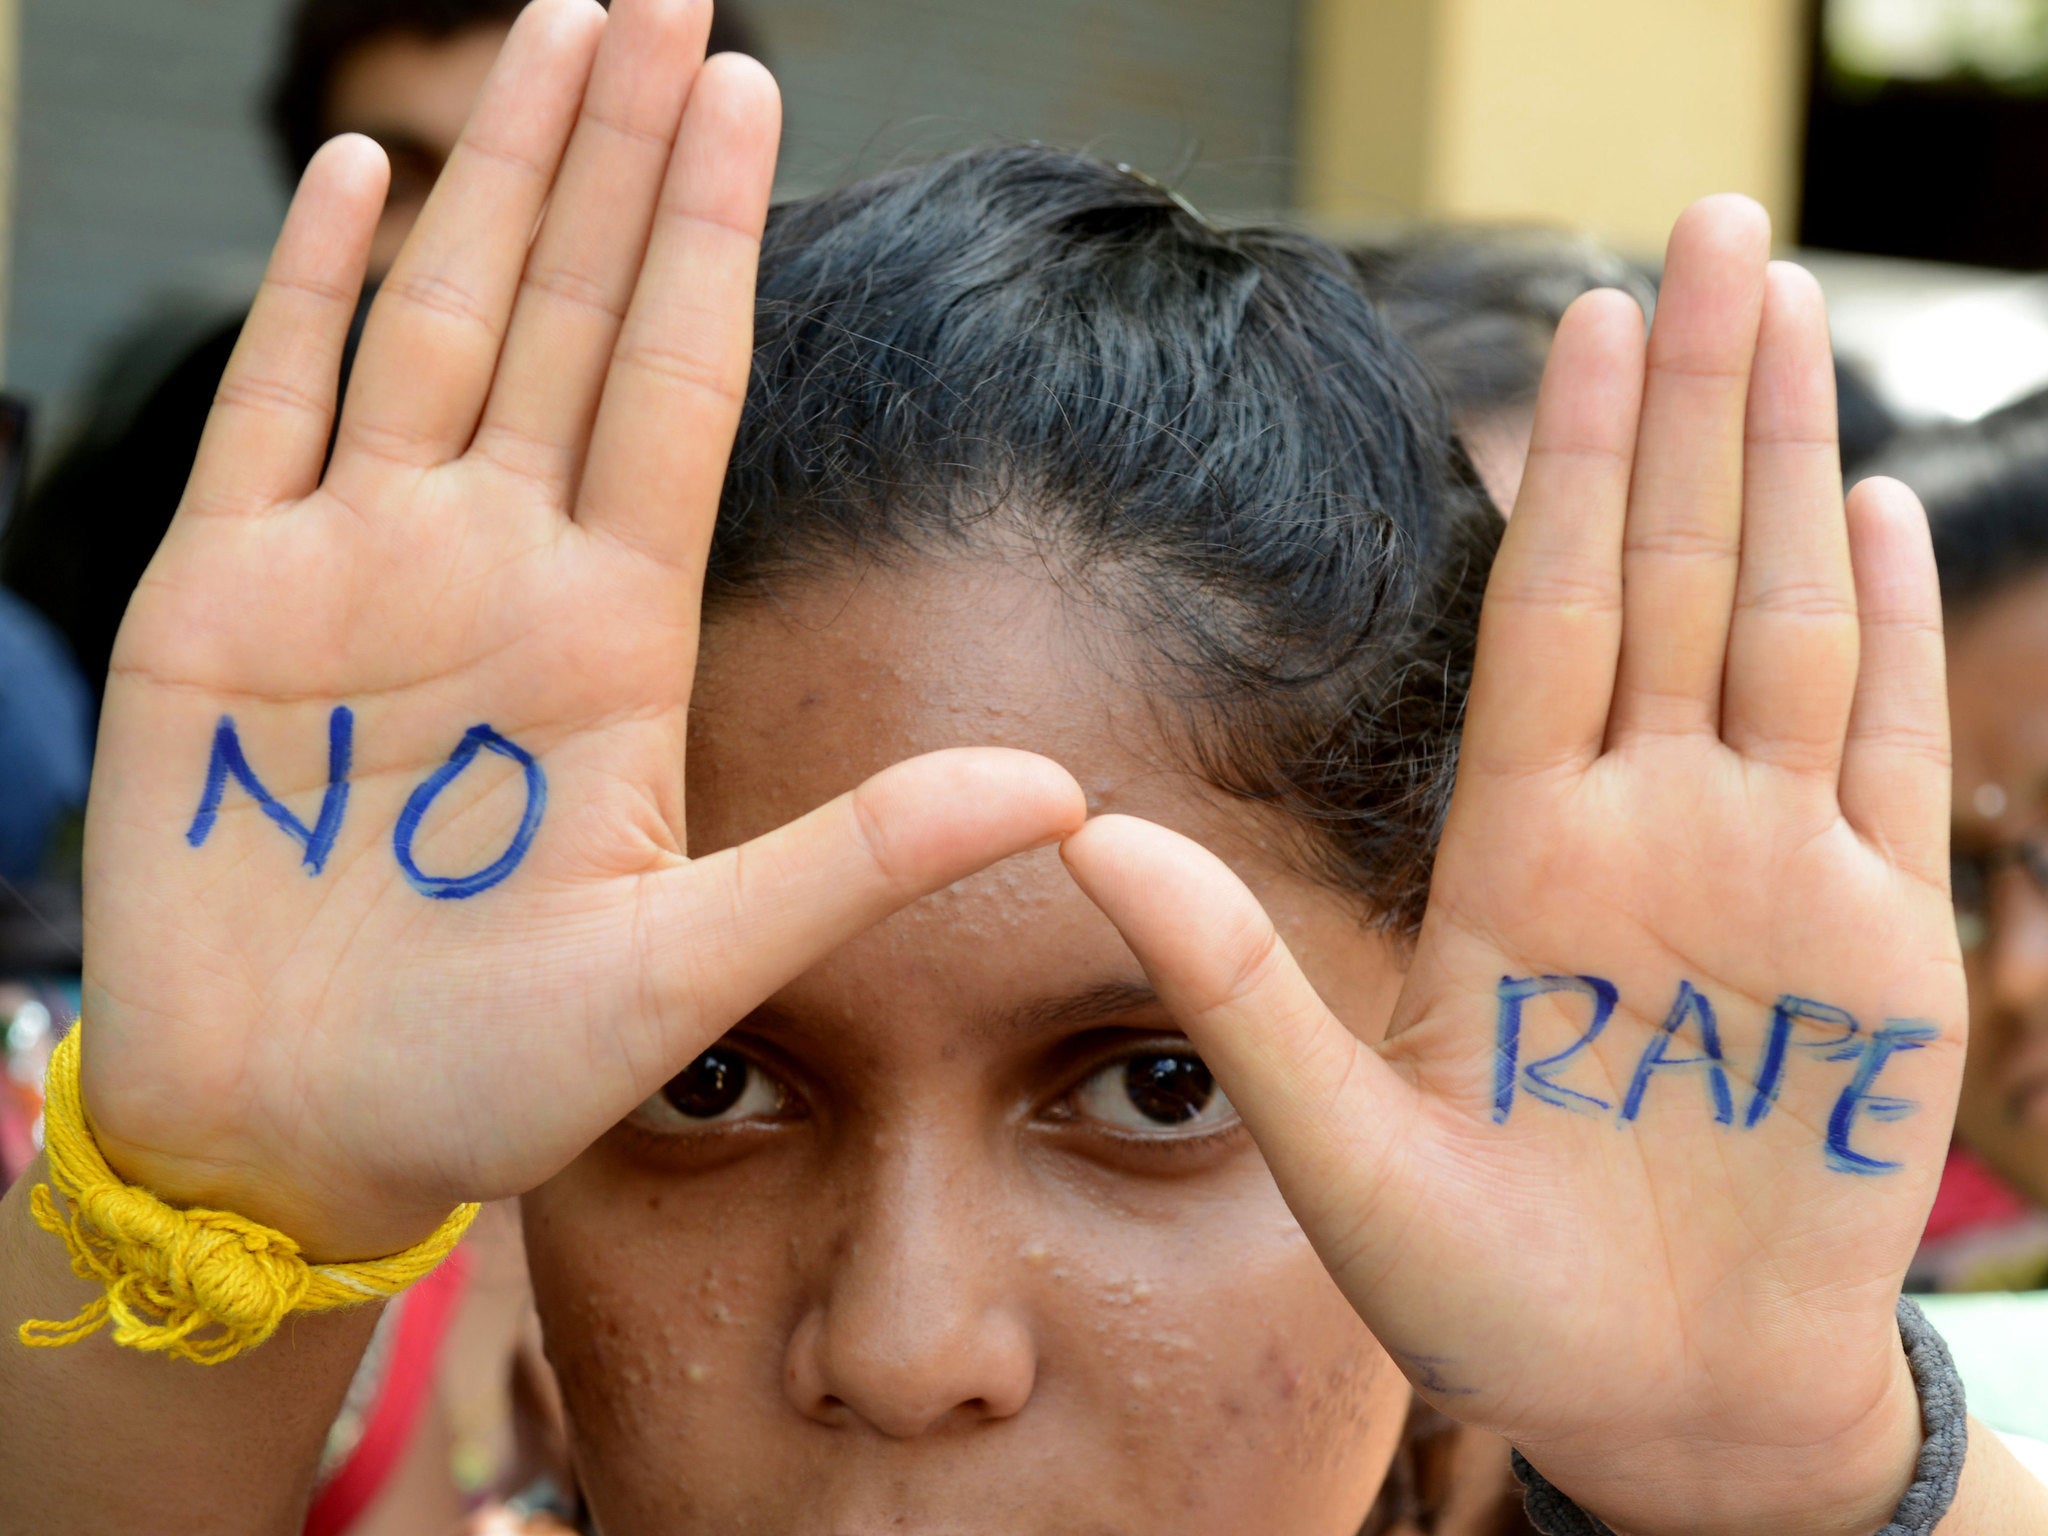 Indian students of Saint Joseph Degree college participate in an anti-rape protest in Hyderabad on September 13, 2013